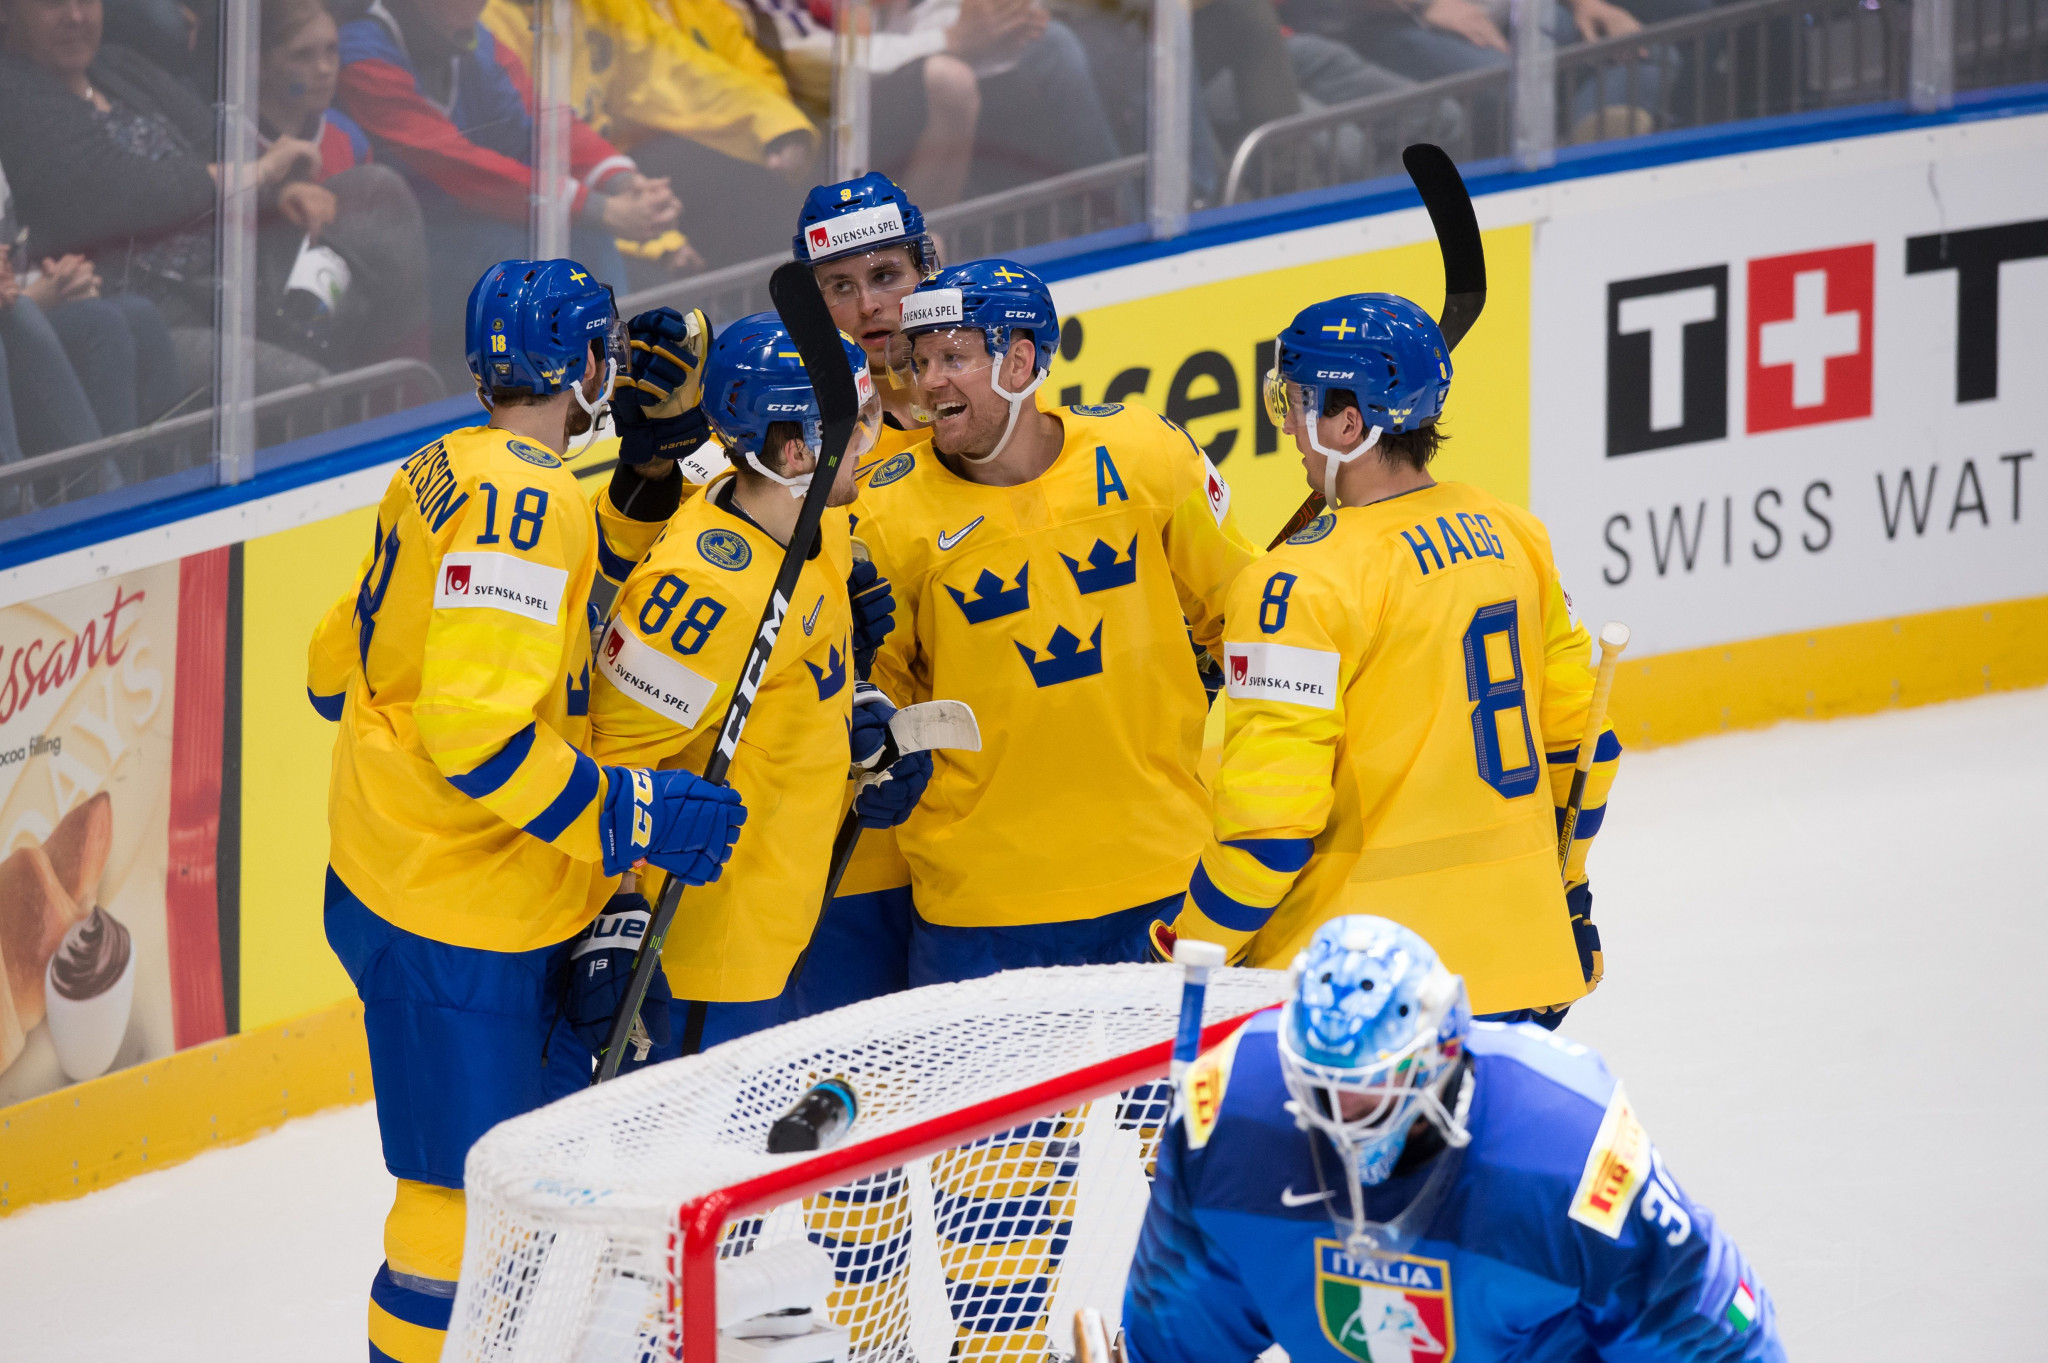 Sweden celebrated an impressive 8-0 win over Italy ©Getty Images